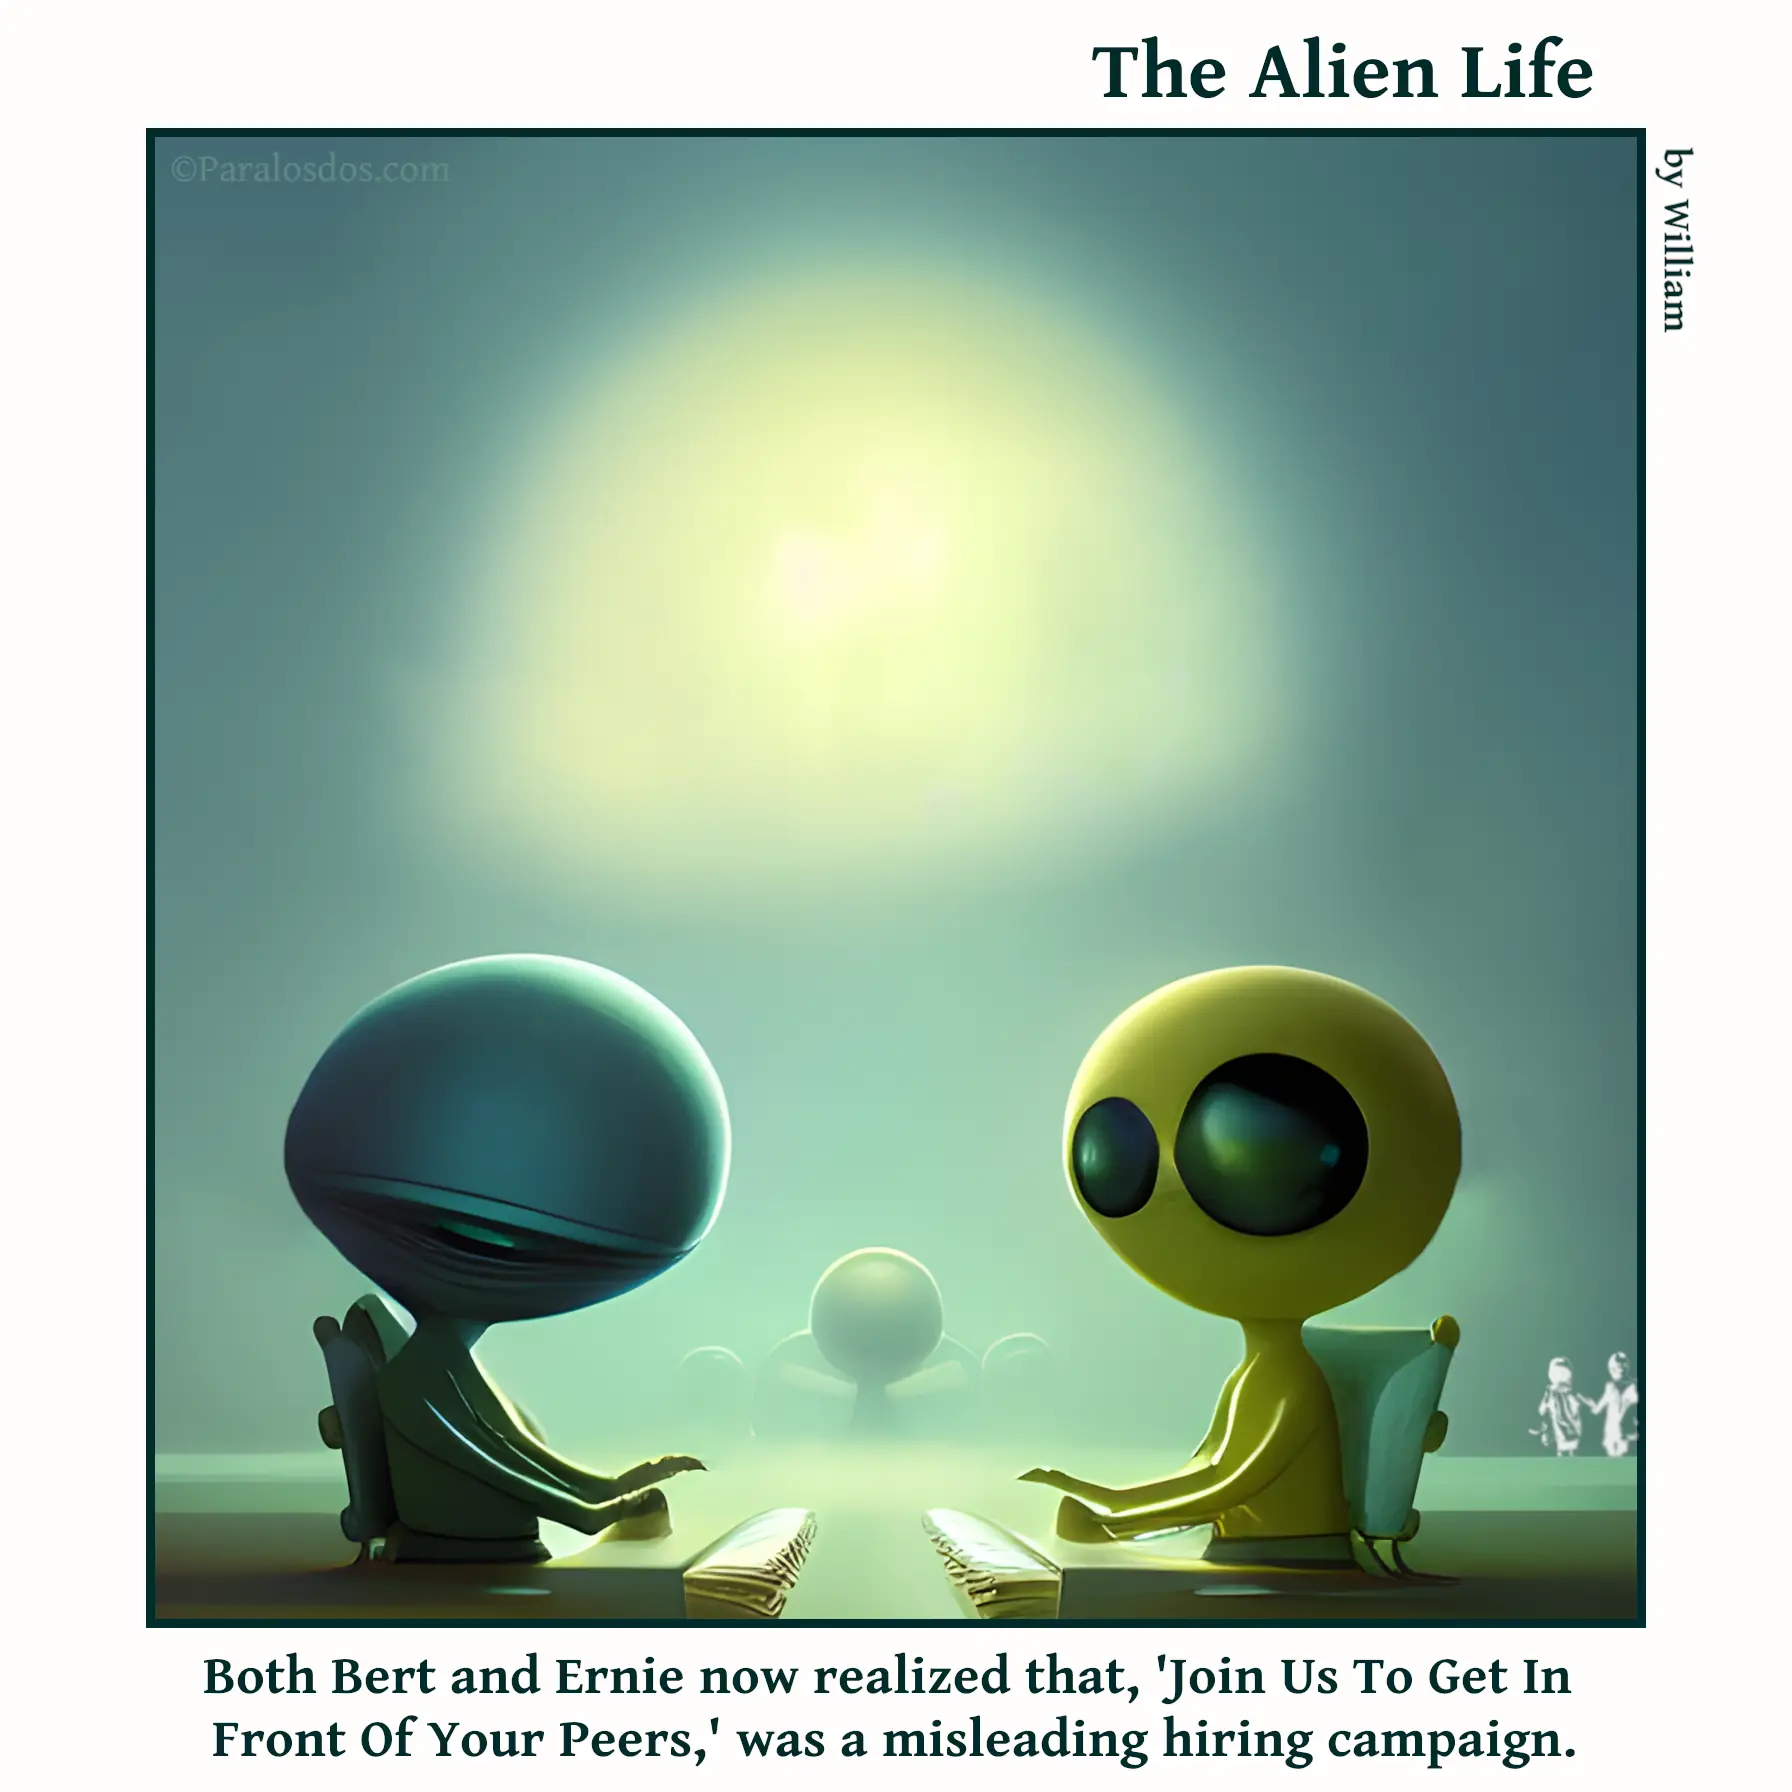 The Alien Life, one panel Comic. Two aliens are sitting at desks directly across from, and facing each other. The caption reads: Both Bert and Ernie now realized that, 'Join Us To Get In Front Of Your Peers,' was a misleading hiring campaign.